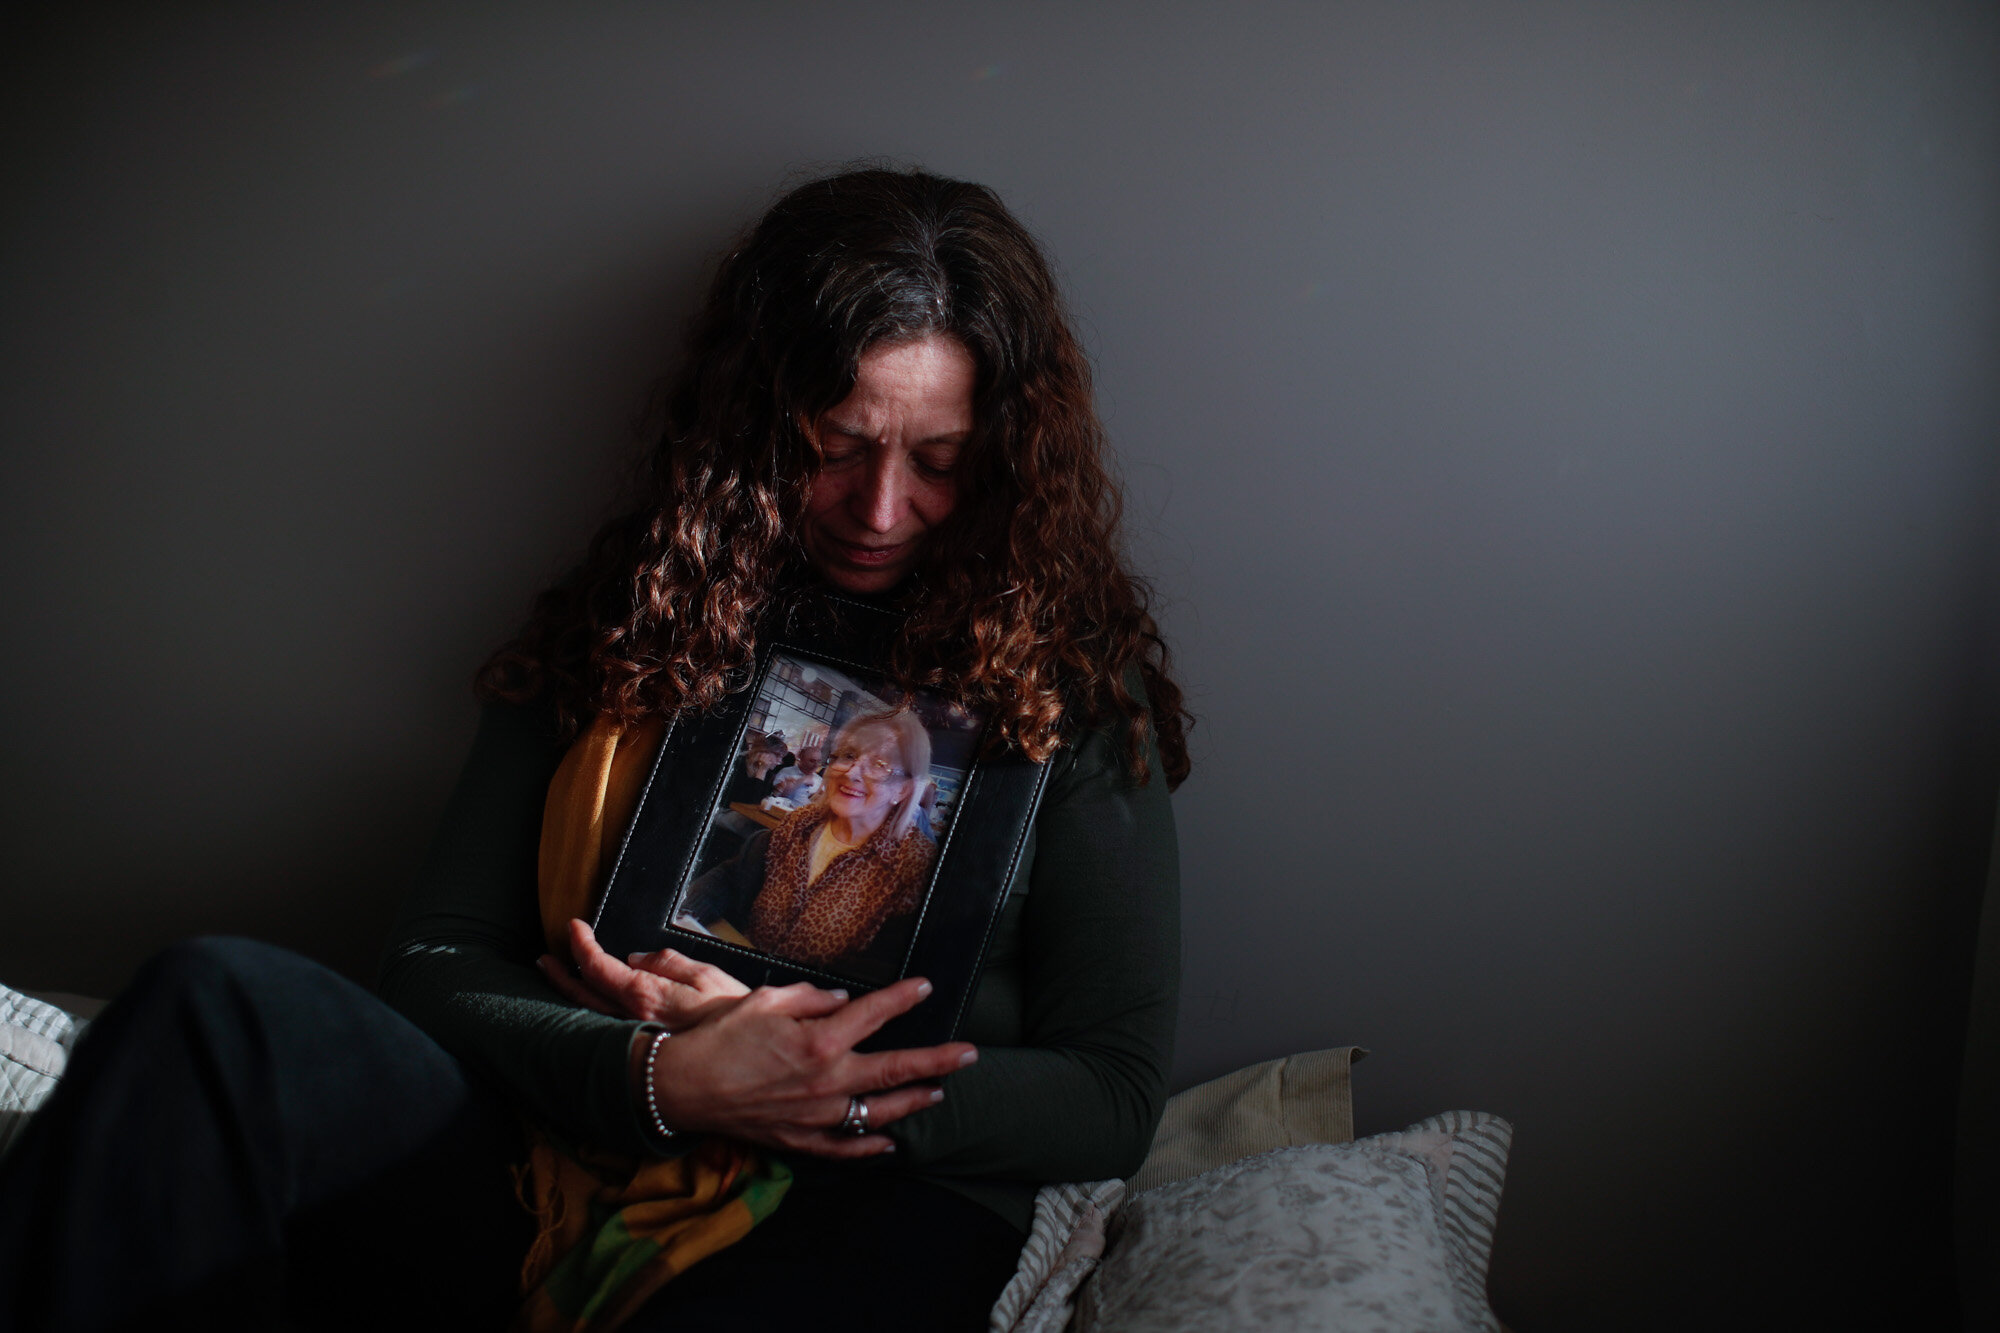  Fernanda Mariotti poses for a photo with a picture of her mother, Martha Pedrotti, who died of COVID-19, at her home in Buenos Aires, Argentina, on Aug. 11, 2020. Although Mariotti insisted on seeing her mother at the hospital, the doctor refused to